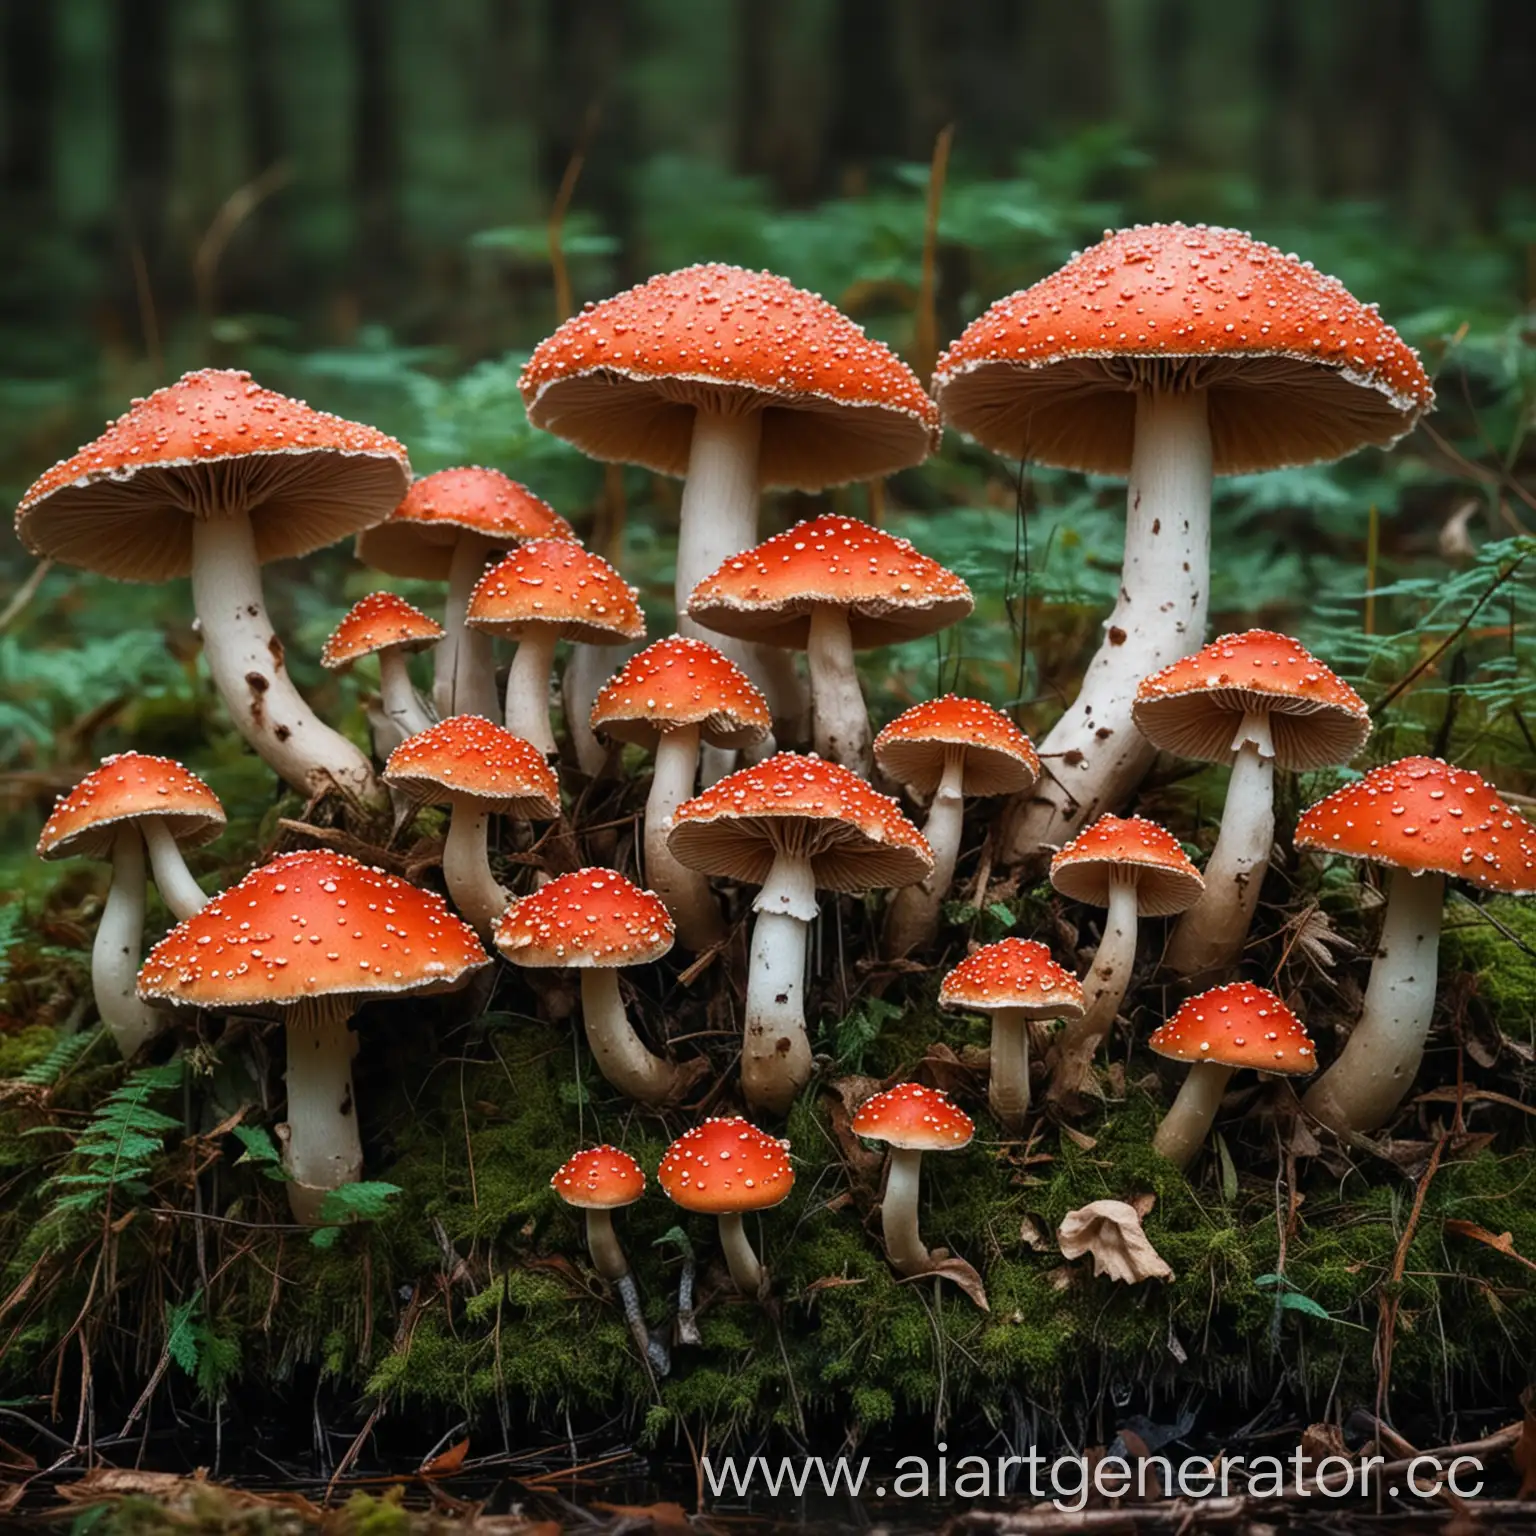 Colorful-Poisonous-Mushrooms-in-Enchanted-Forest